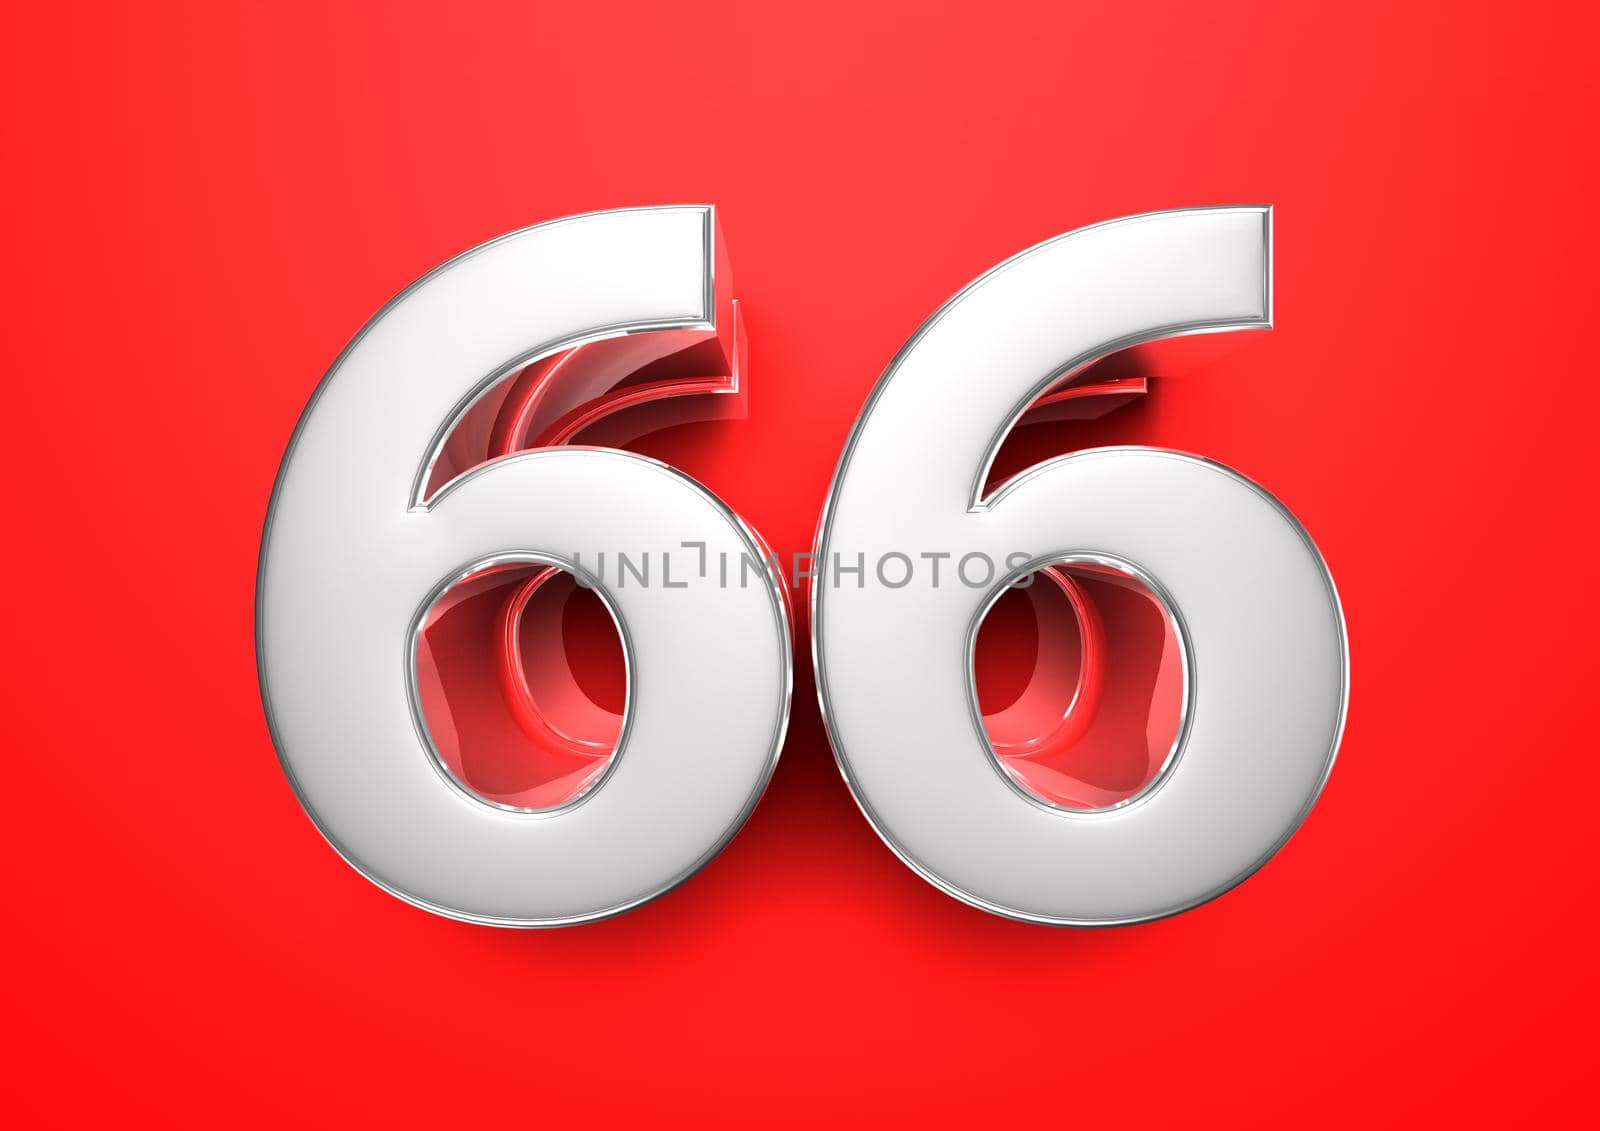 Price tag 66. Anniversary 66. Number 66 3D illustration on a red background. by thitimontoyai